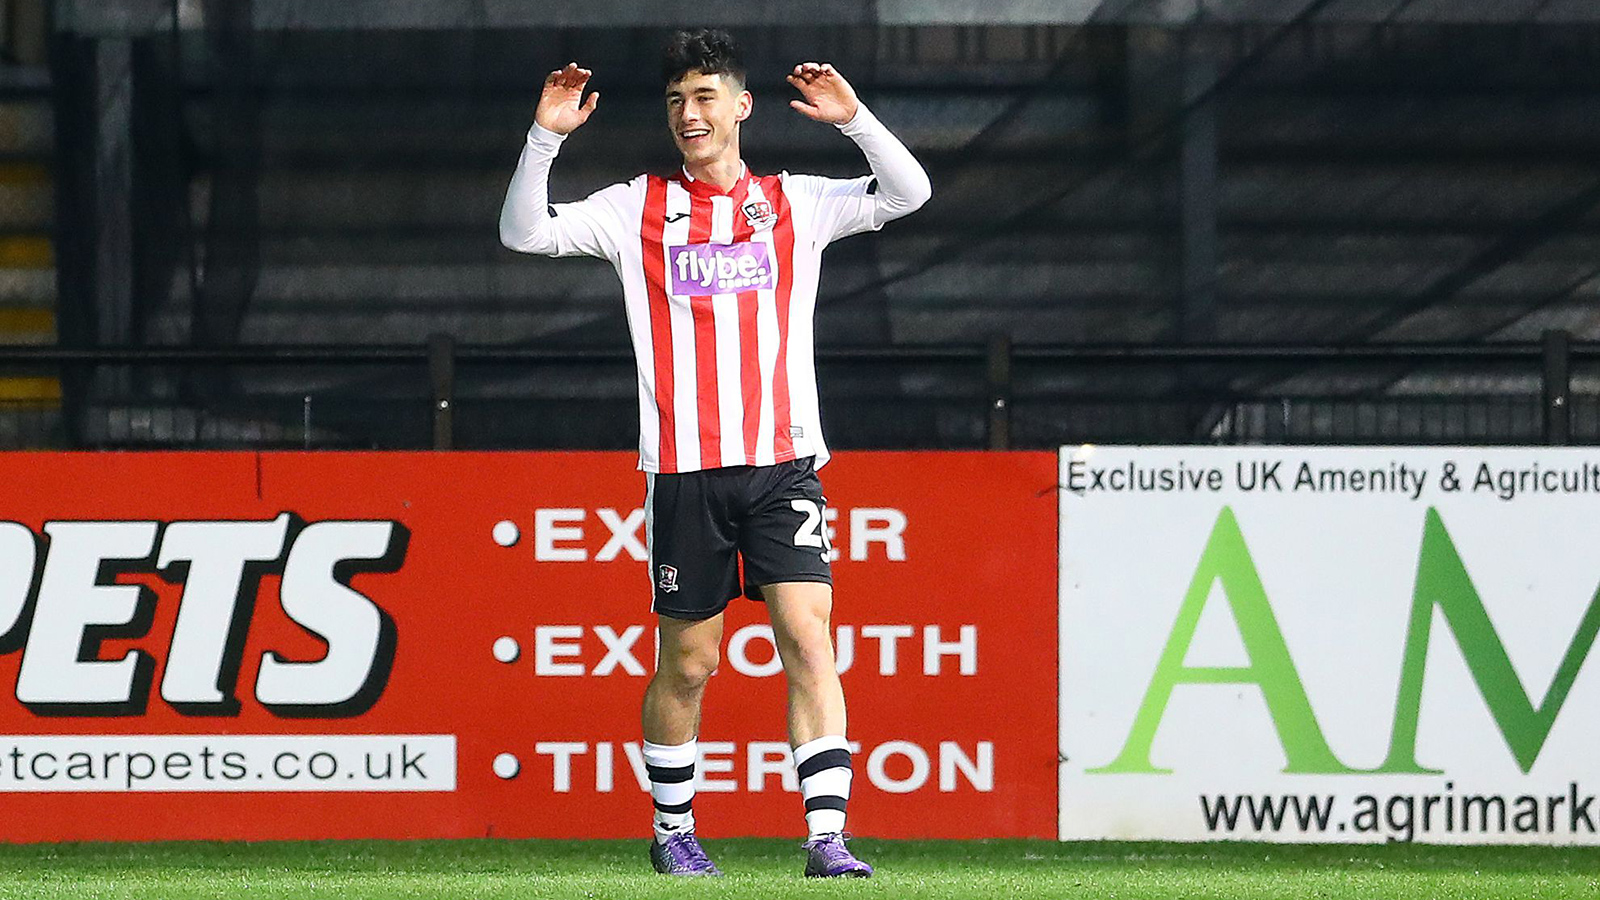 Joel Randall in action for Exeter City